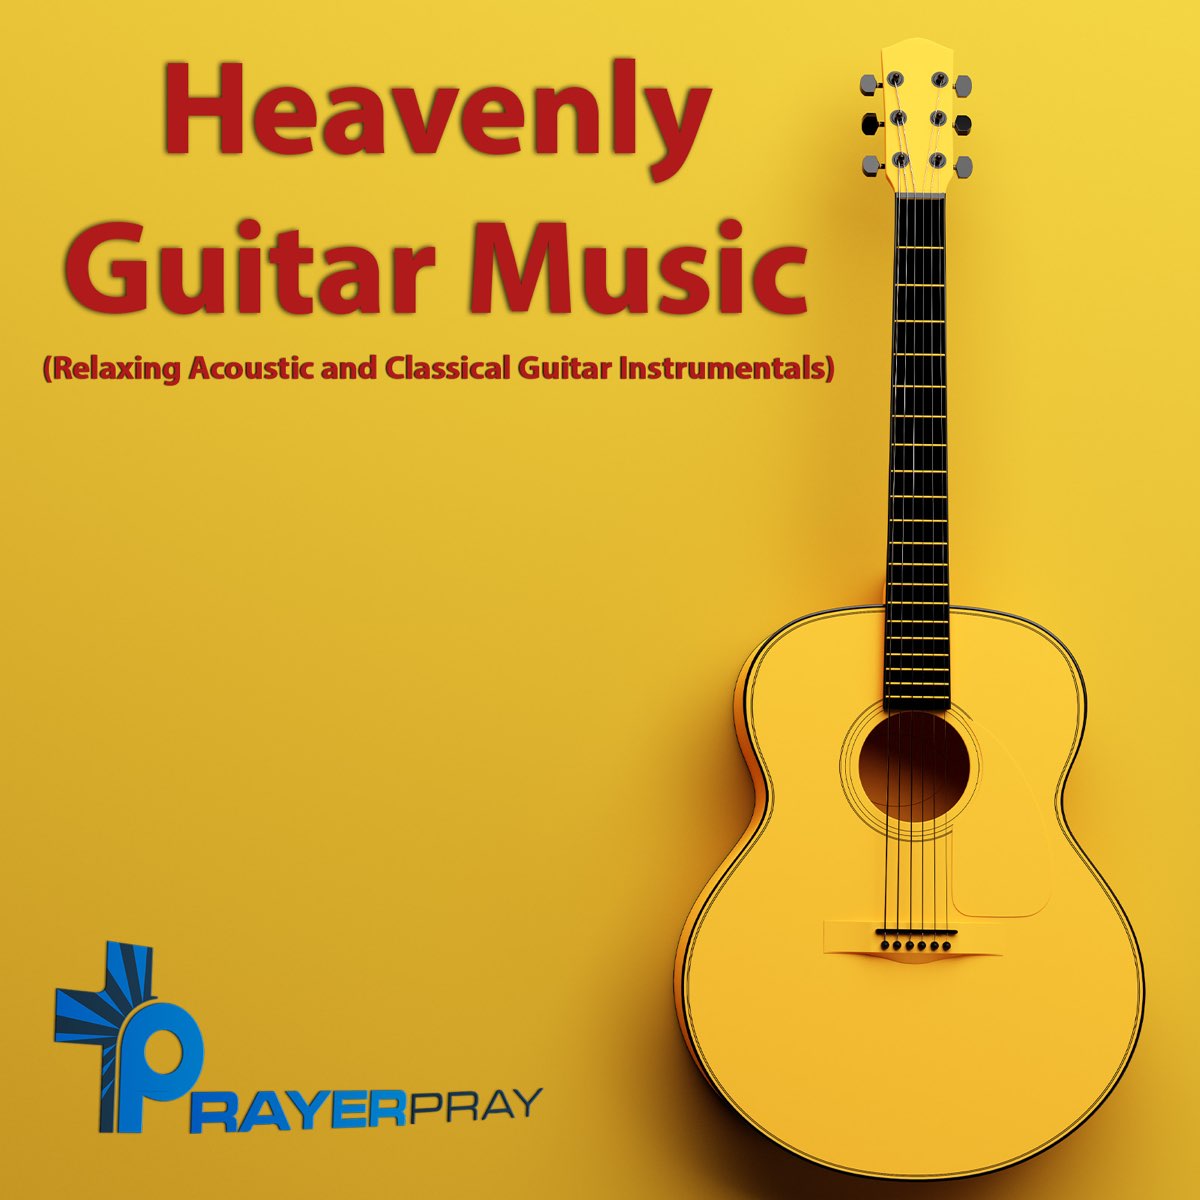 Heavenly Guitar Music (Relaxing Acoustic and Classical Guitar Instrumentals)  by Prayer Pray on Apple Music